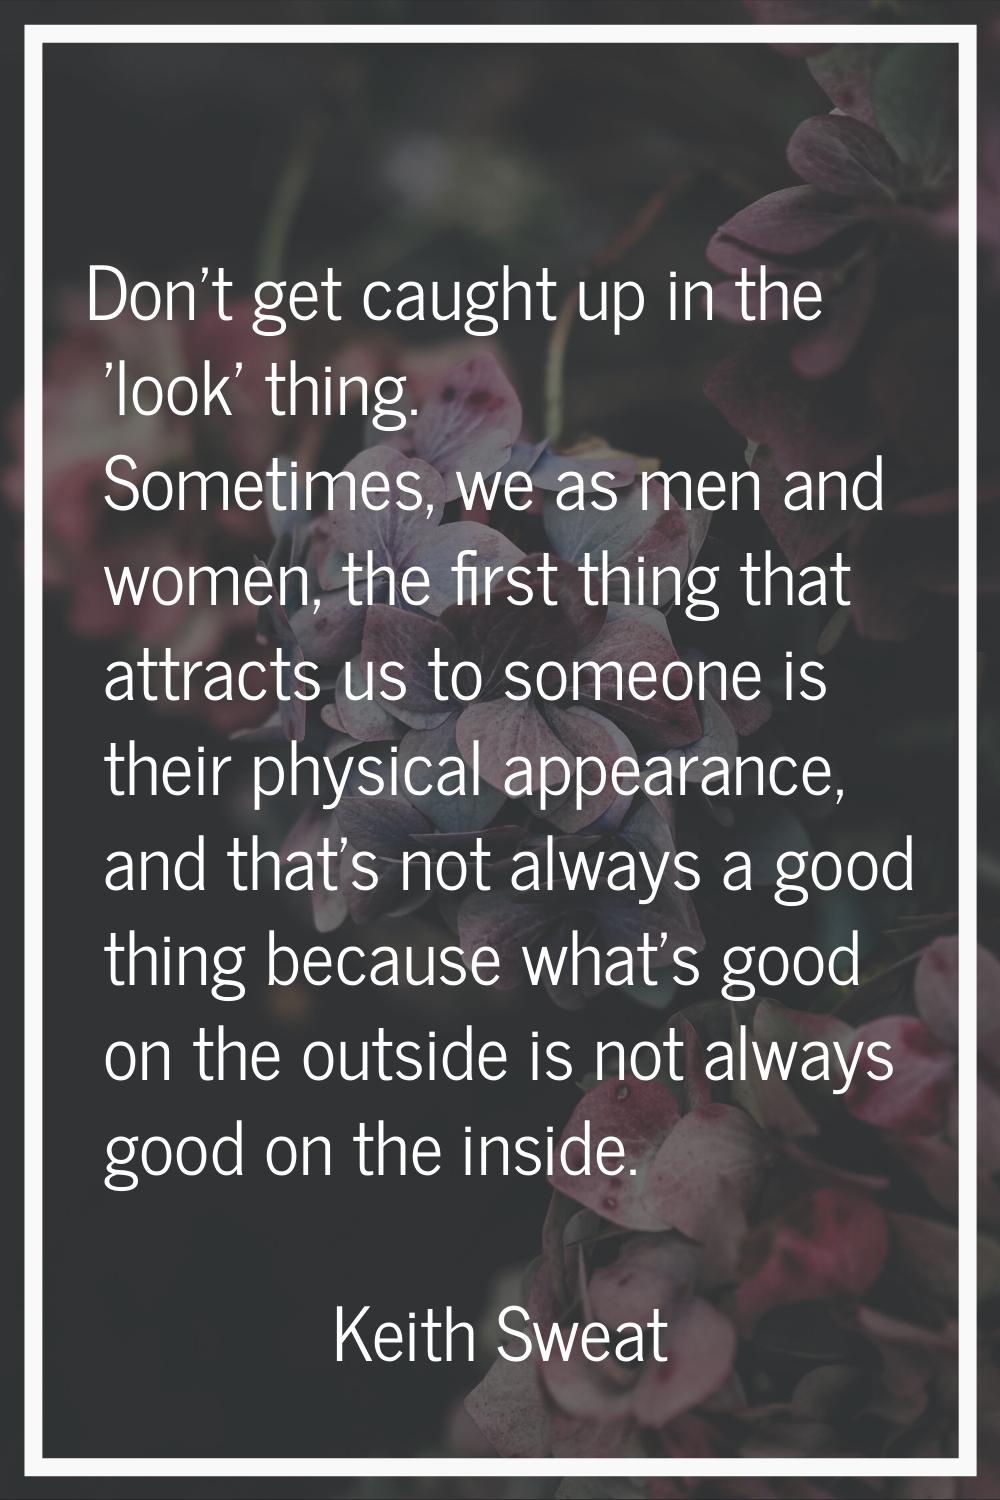 Don't get caught up in the 'look' thing. Sometimes, we as men and women, the first thing that attra